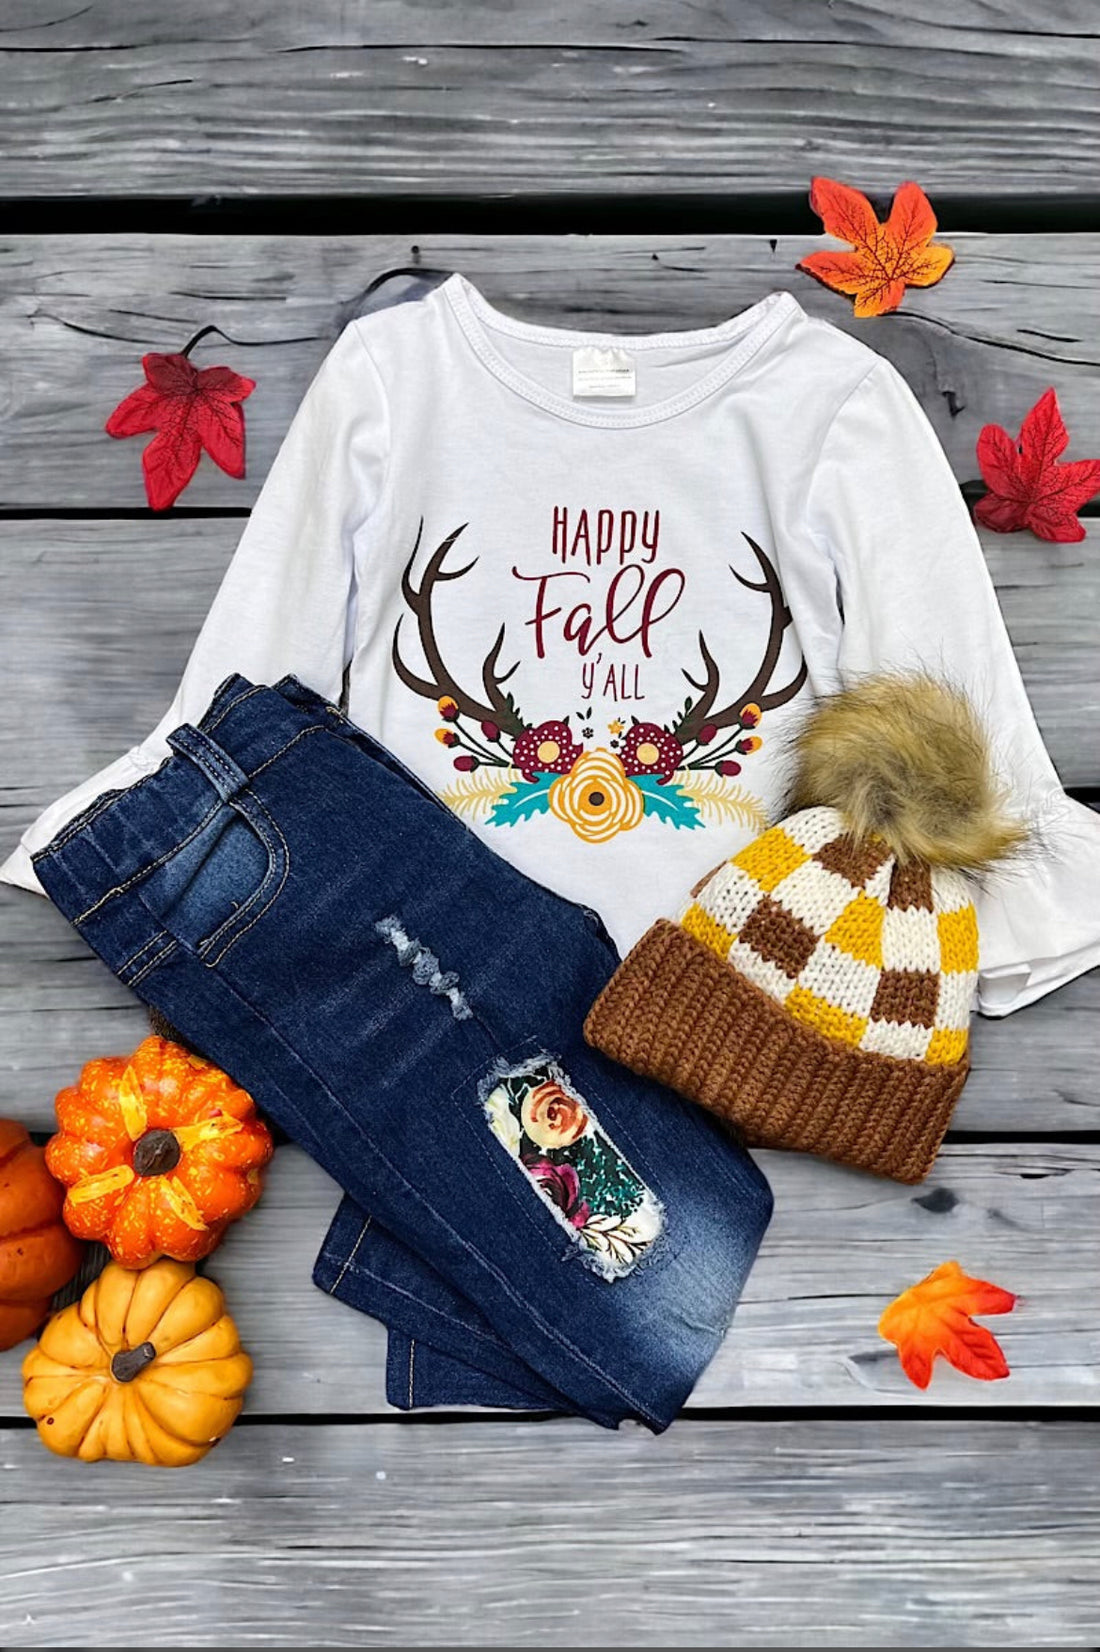 “Happy Fall Y’all” Girls Graphic Shirt with Ruffle Sleeves and Denim Pants with Floral Patches